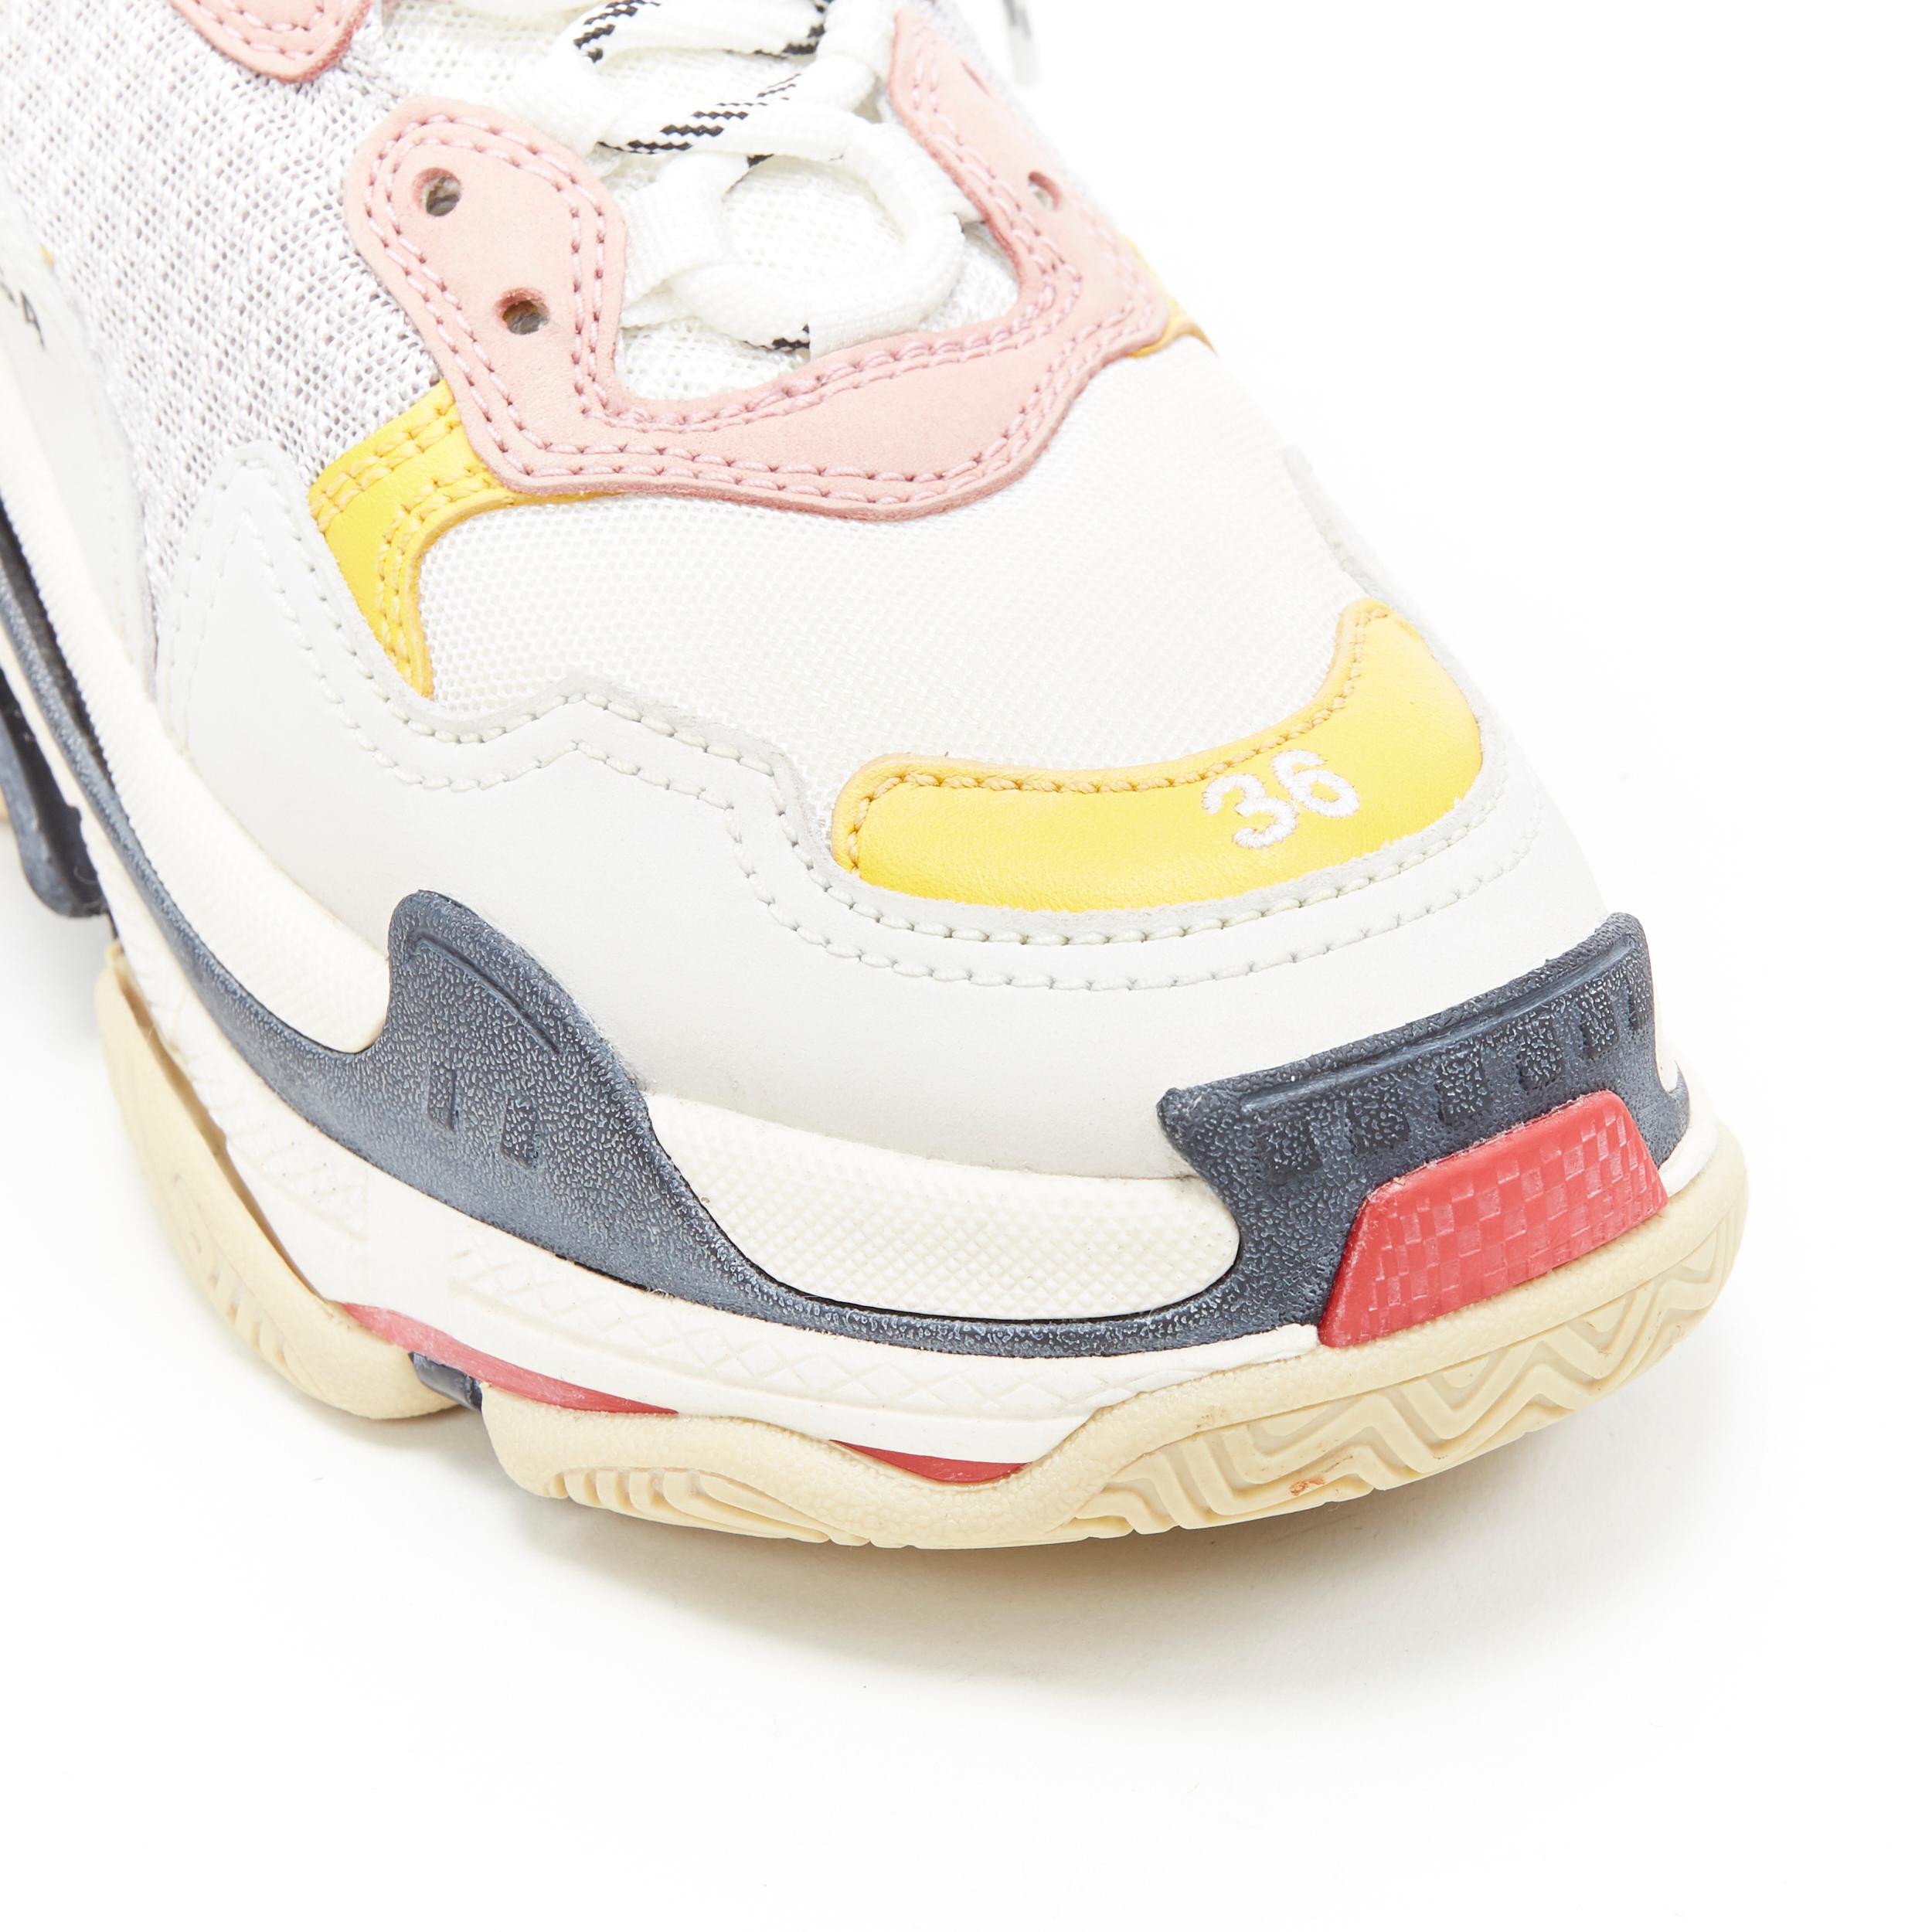 BALENCIAGA Triple S beige cream pink yellow accent chunky sole dad sneaker EU36
Brand: Balenciaga
Designer: Demna Gvasalia
Model Name / Style: Triple S
Material: Leather, beige knit
Color: Beige, pink and yellow detailing
Pattern: Other
Closure: